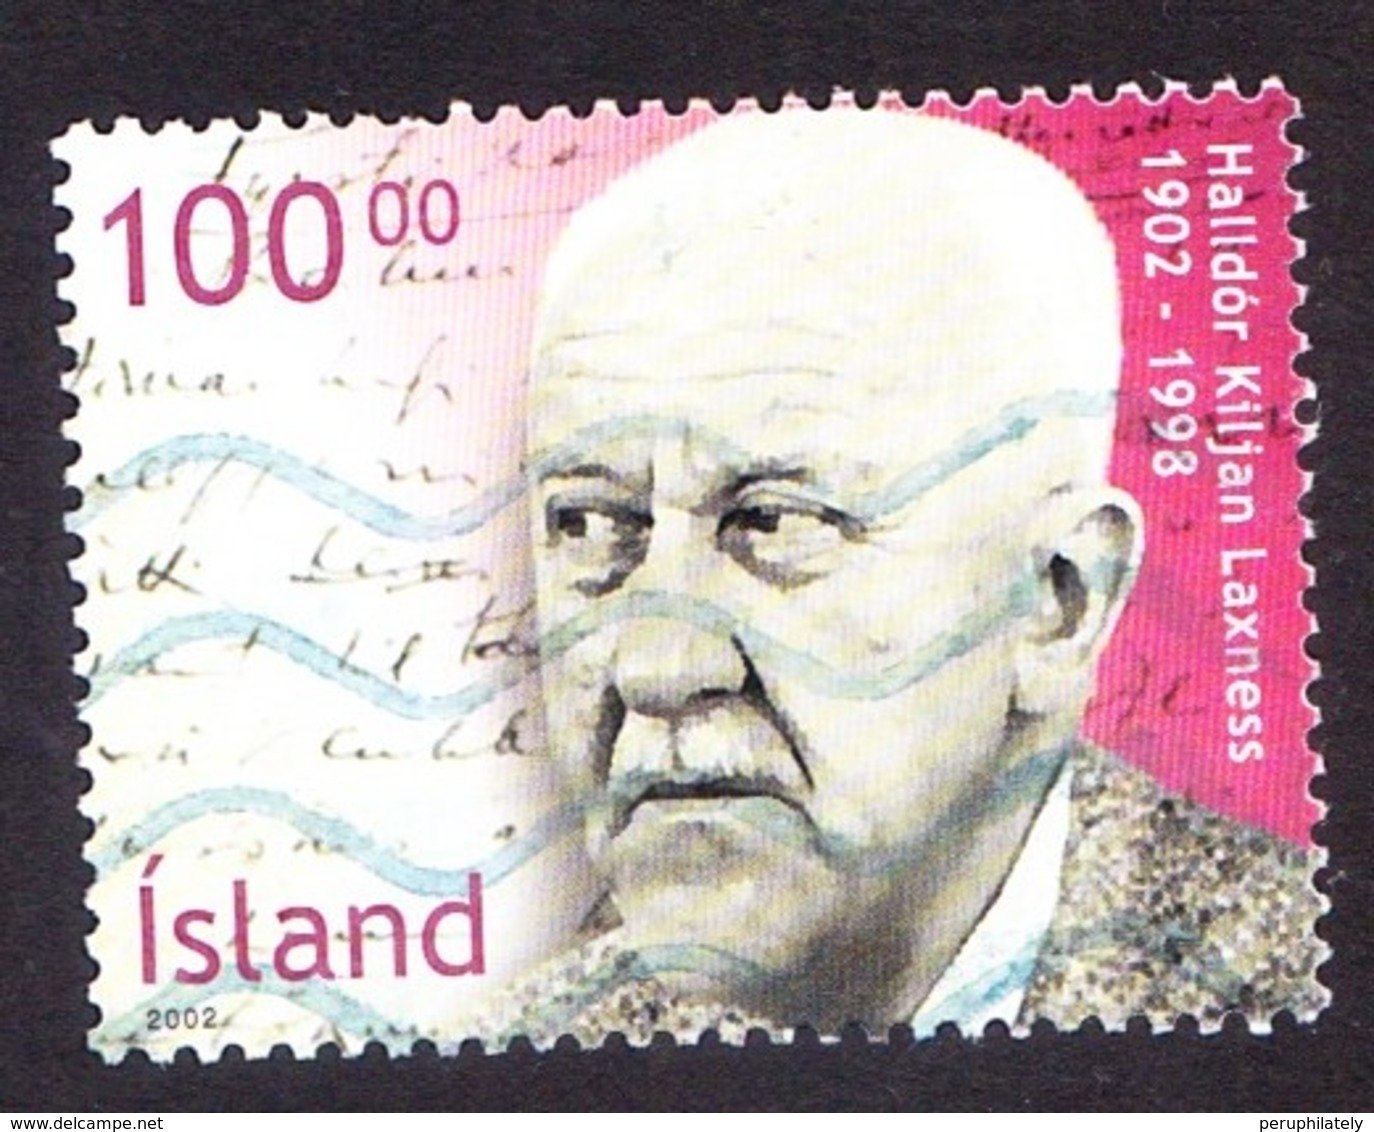 Iceland 2002 The 100th Anniversary Of The Birth Of Nobel Prize Winner Halldor Laxness - Used Stamps